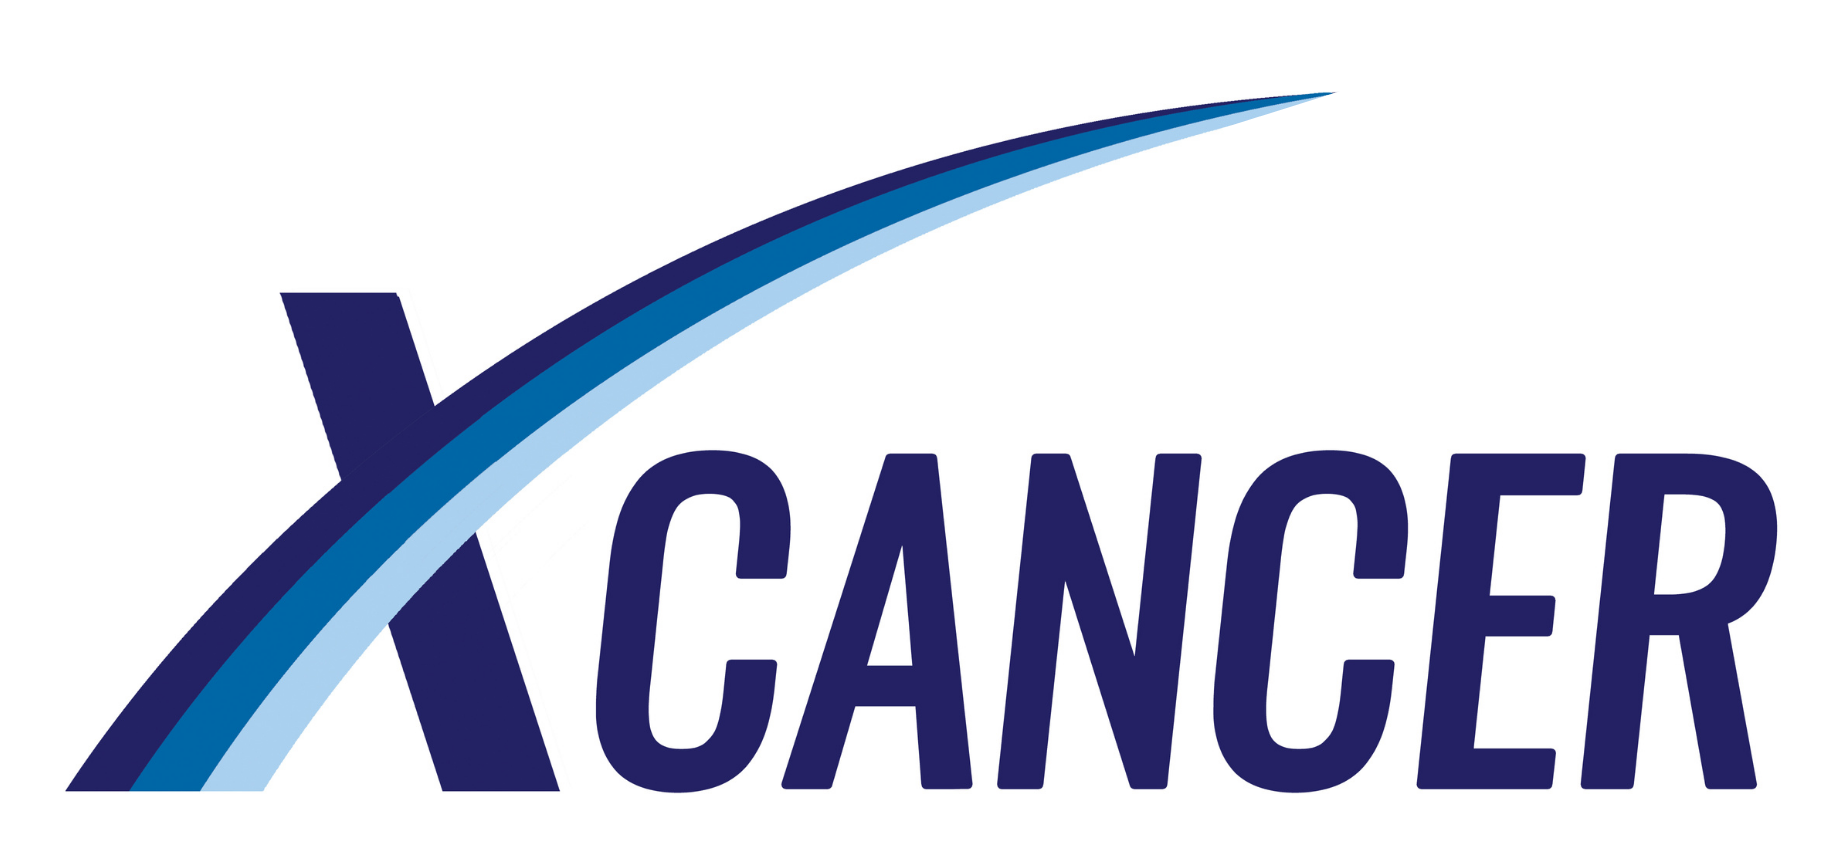 XCancer Research